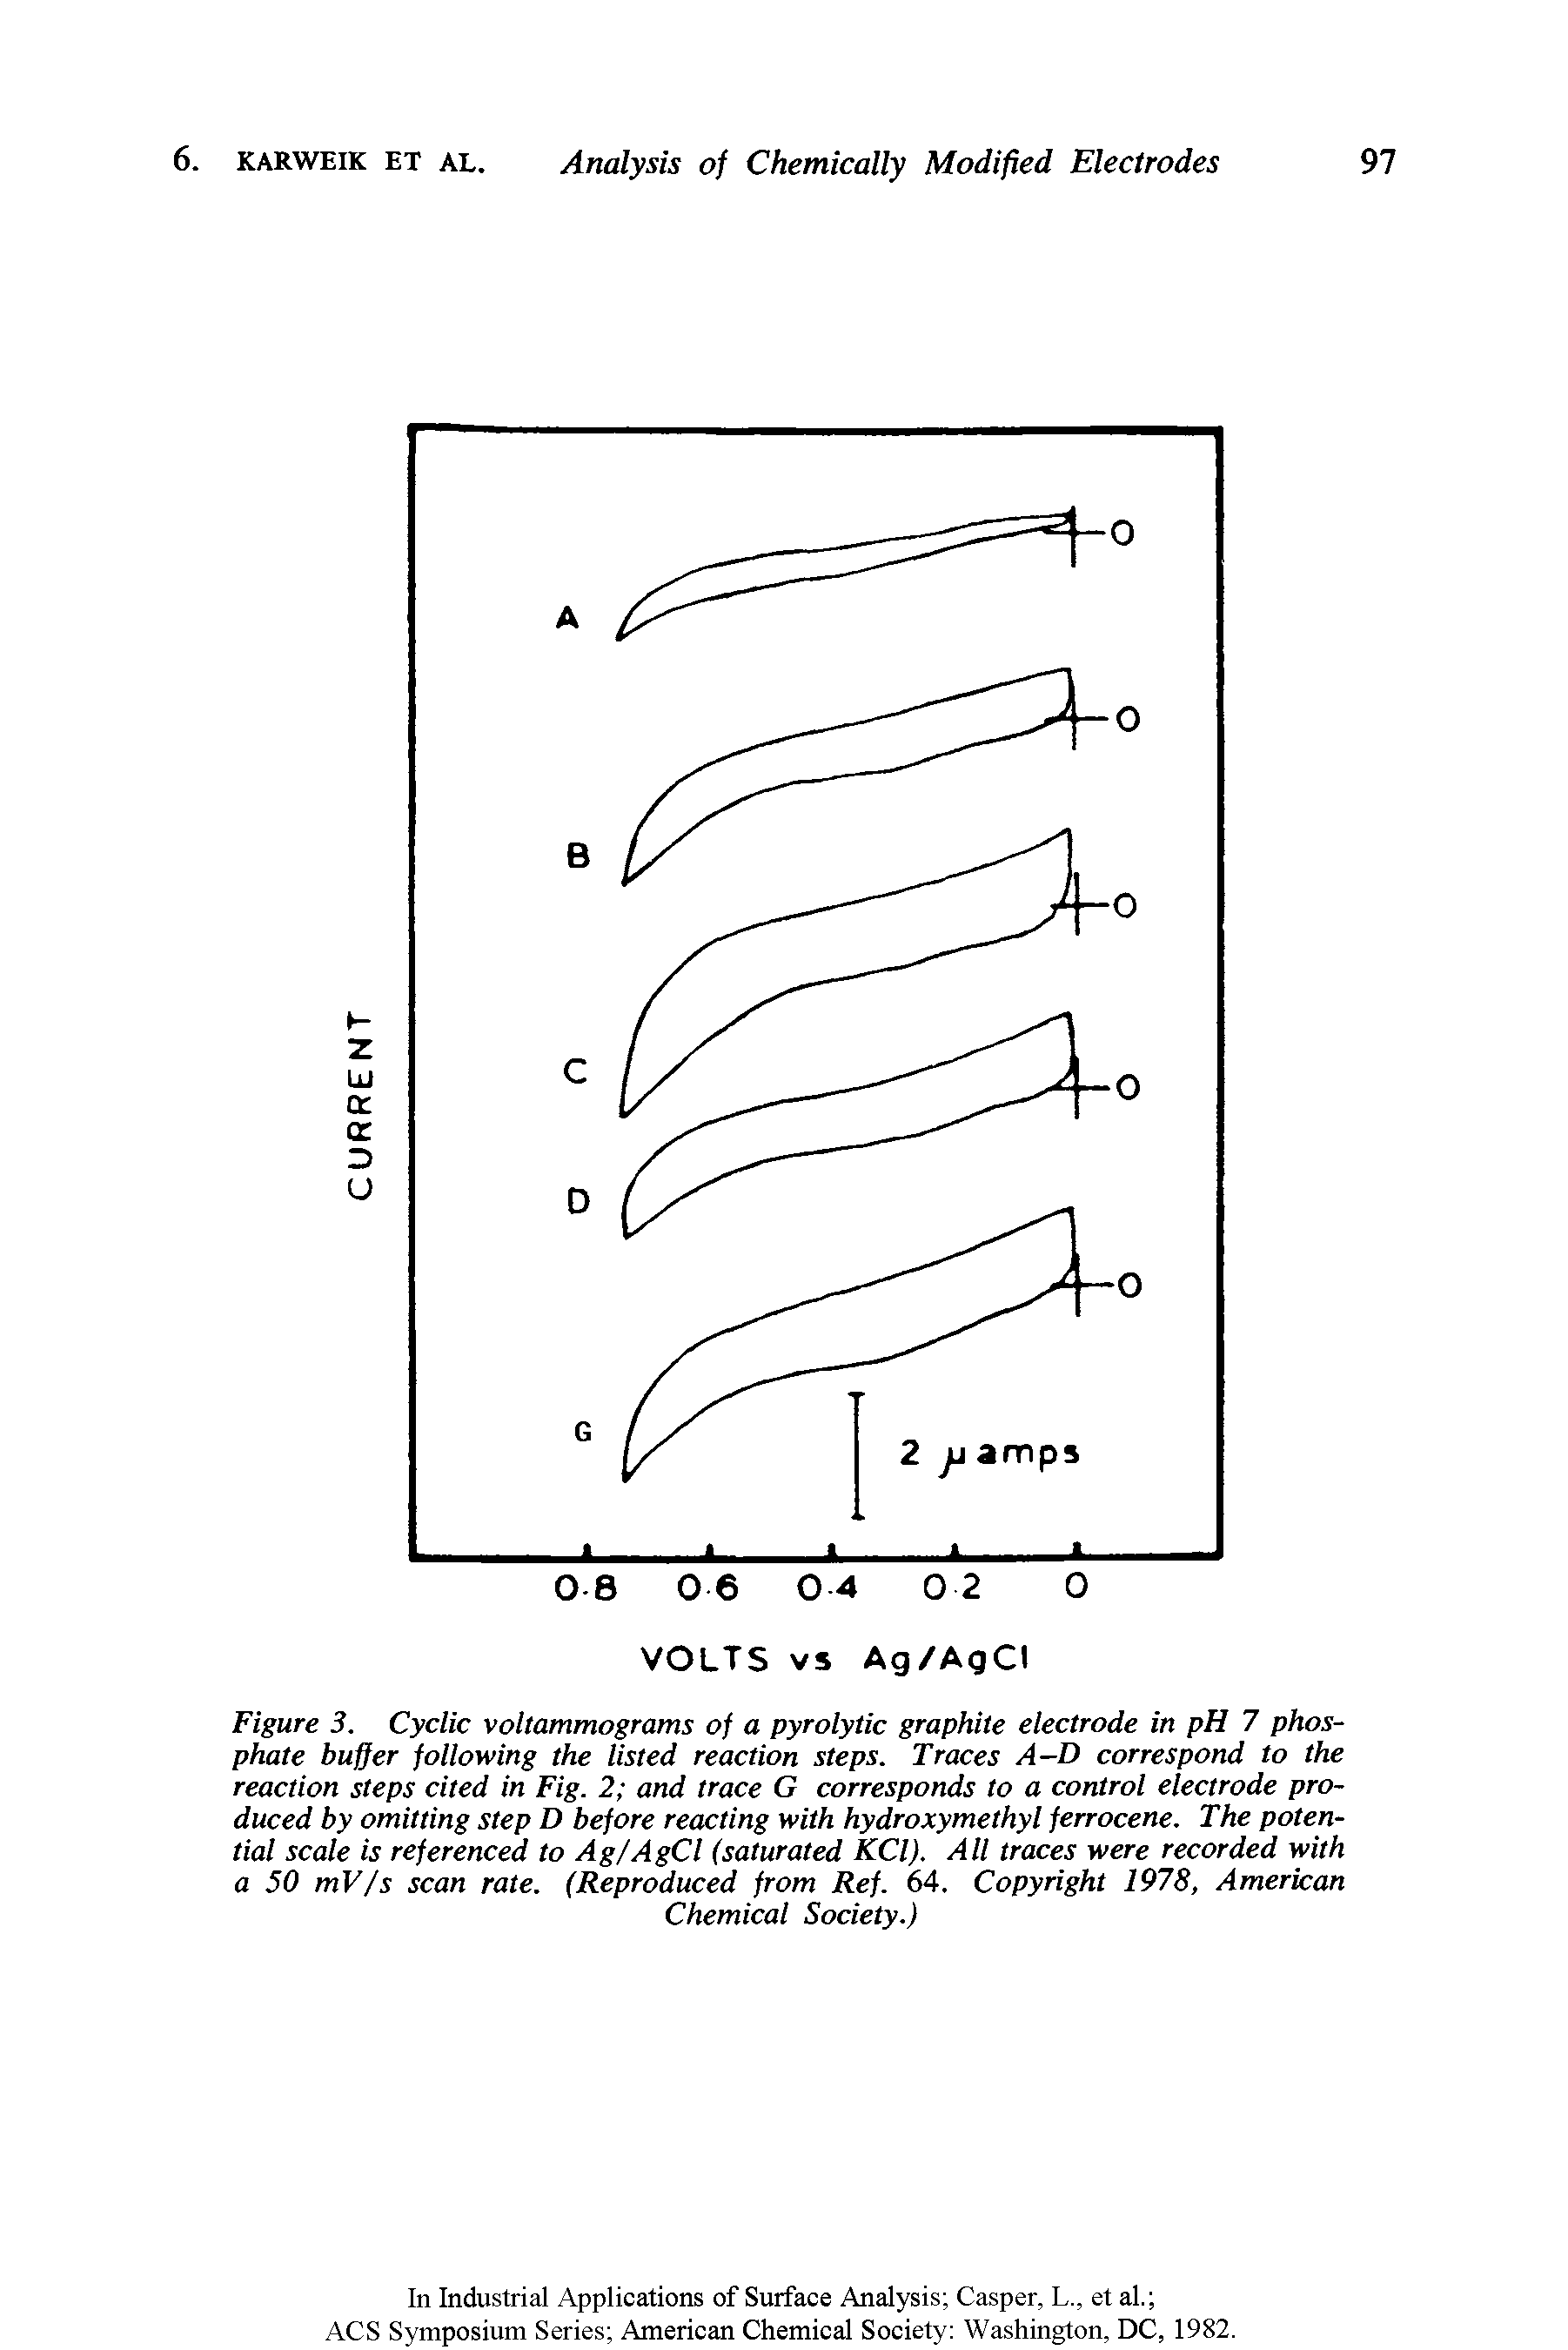 Figure 3. Cyclic voltammograms of a pyrolytic graphite electrode in pH 7 phosphate buffer following the listed reaction steps. Traces A-D correspond to the reaction steps cited in Fig. 2 and trace G corresponds to a control electrode produced by omitting step D before reacting with hydroxymethyl ferrocene. The potential scale is referenced to Ag/AgCl (saturated KCl). All traces were recorded with a 50 mV/s scan rate. (Reproduced from Ref. 64. Copyright 1978, American...